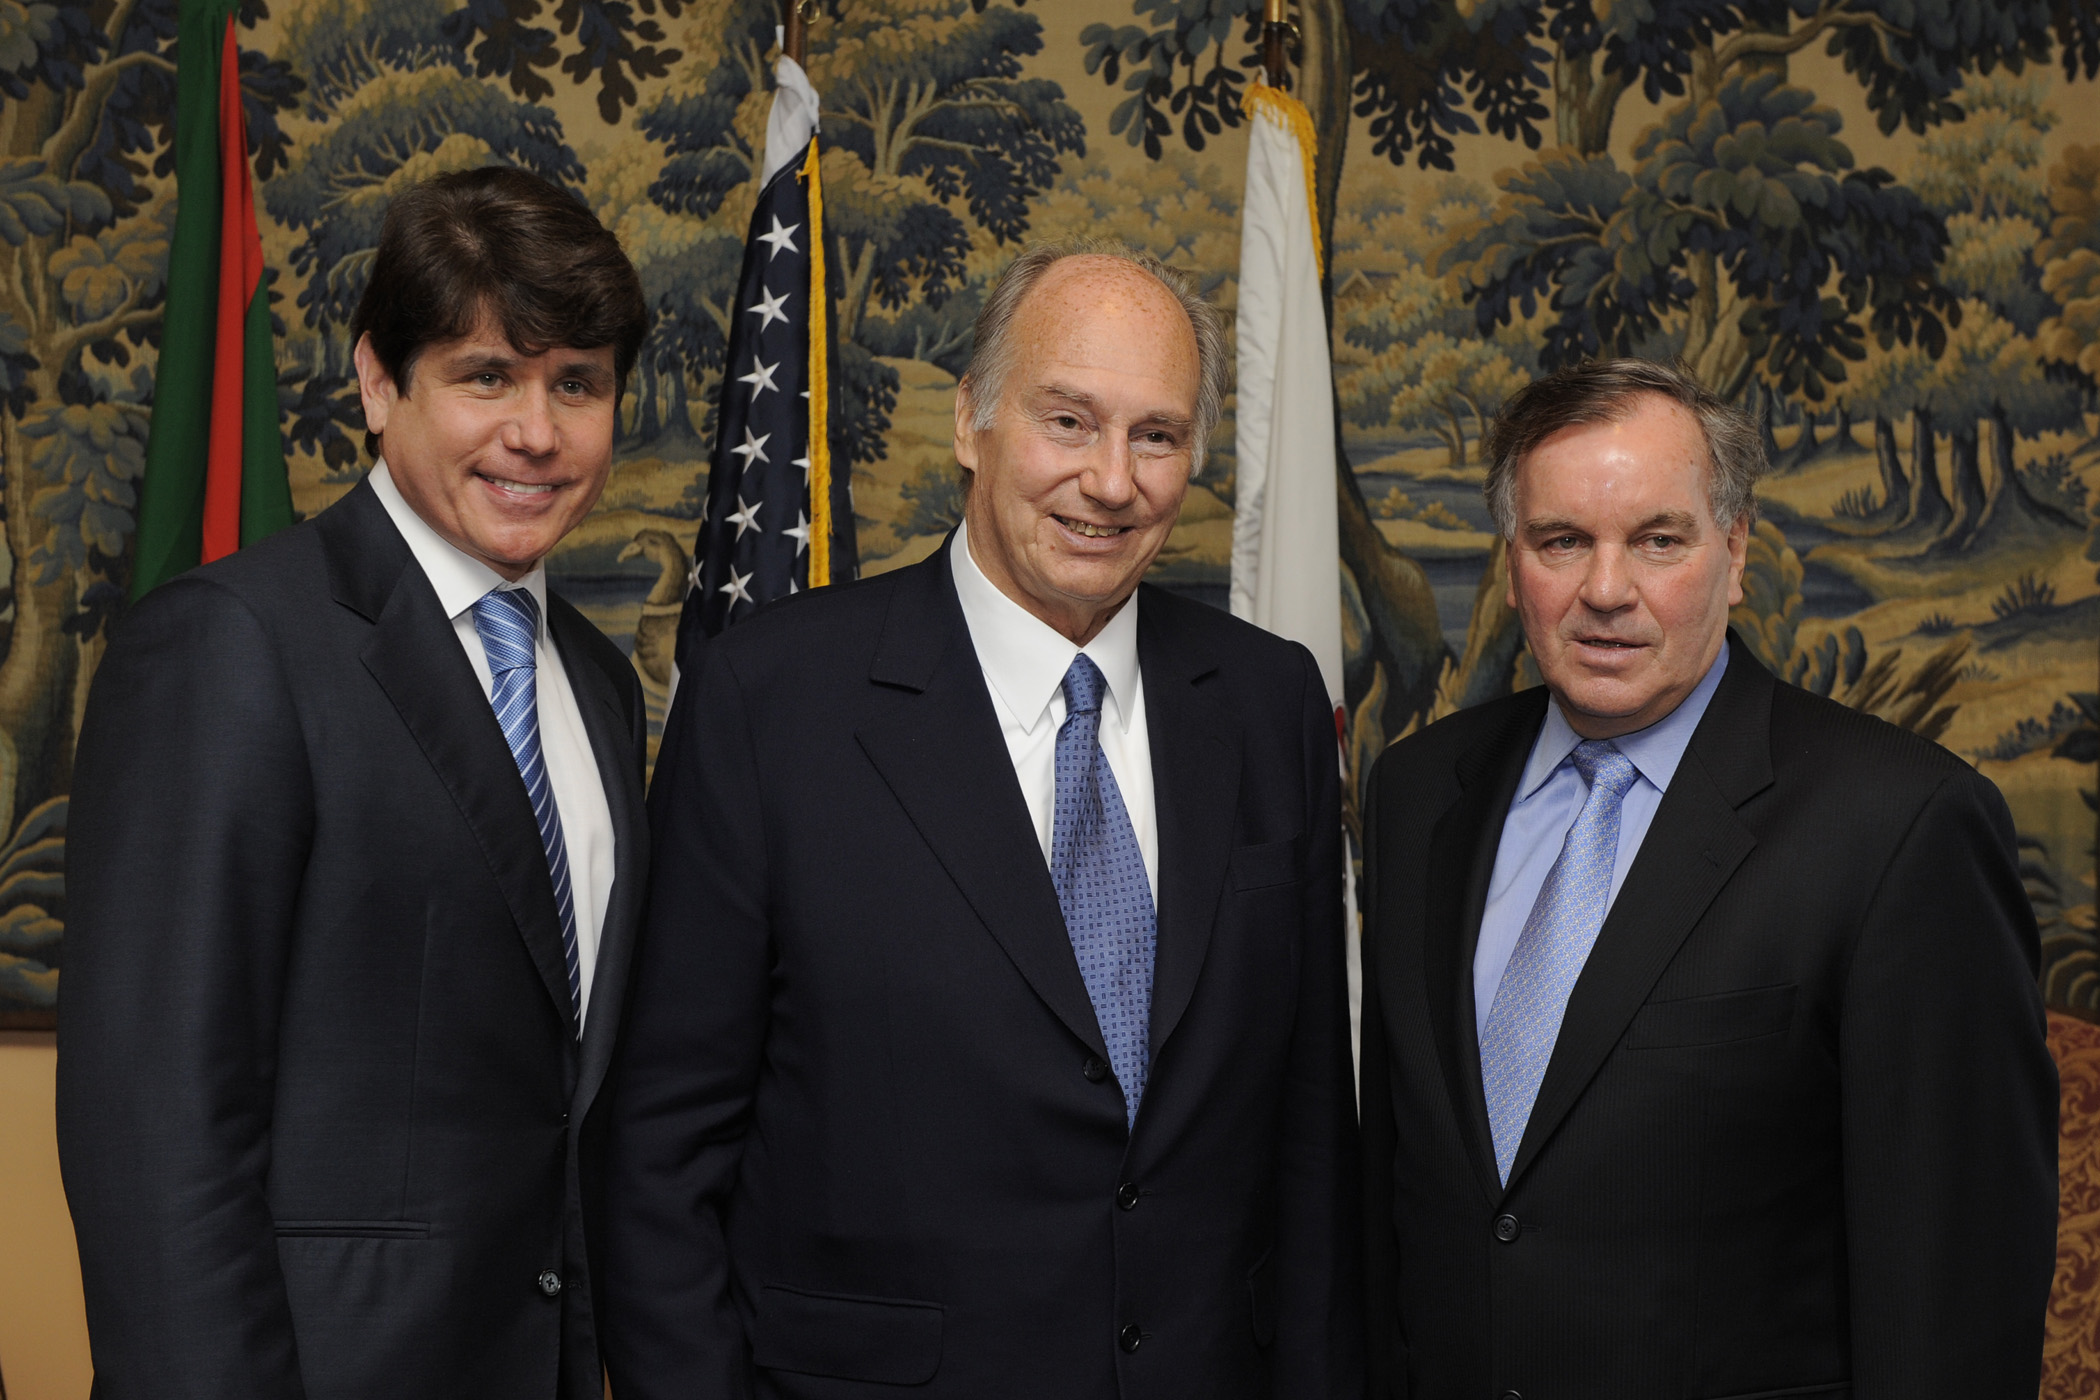 Mawlana Hazar Imam with Governor Rod Blagojevich of Illinois and Mayor Richard Daley of Chicago at a luncheon hosted by the Governor in honour of Hazar Imam`s Golden Jubilee. Photo: Gary Otte